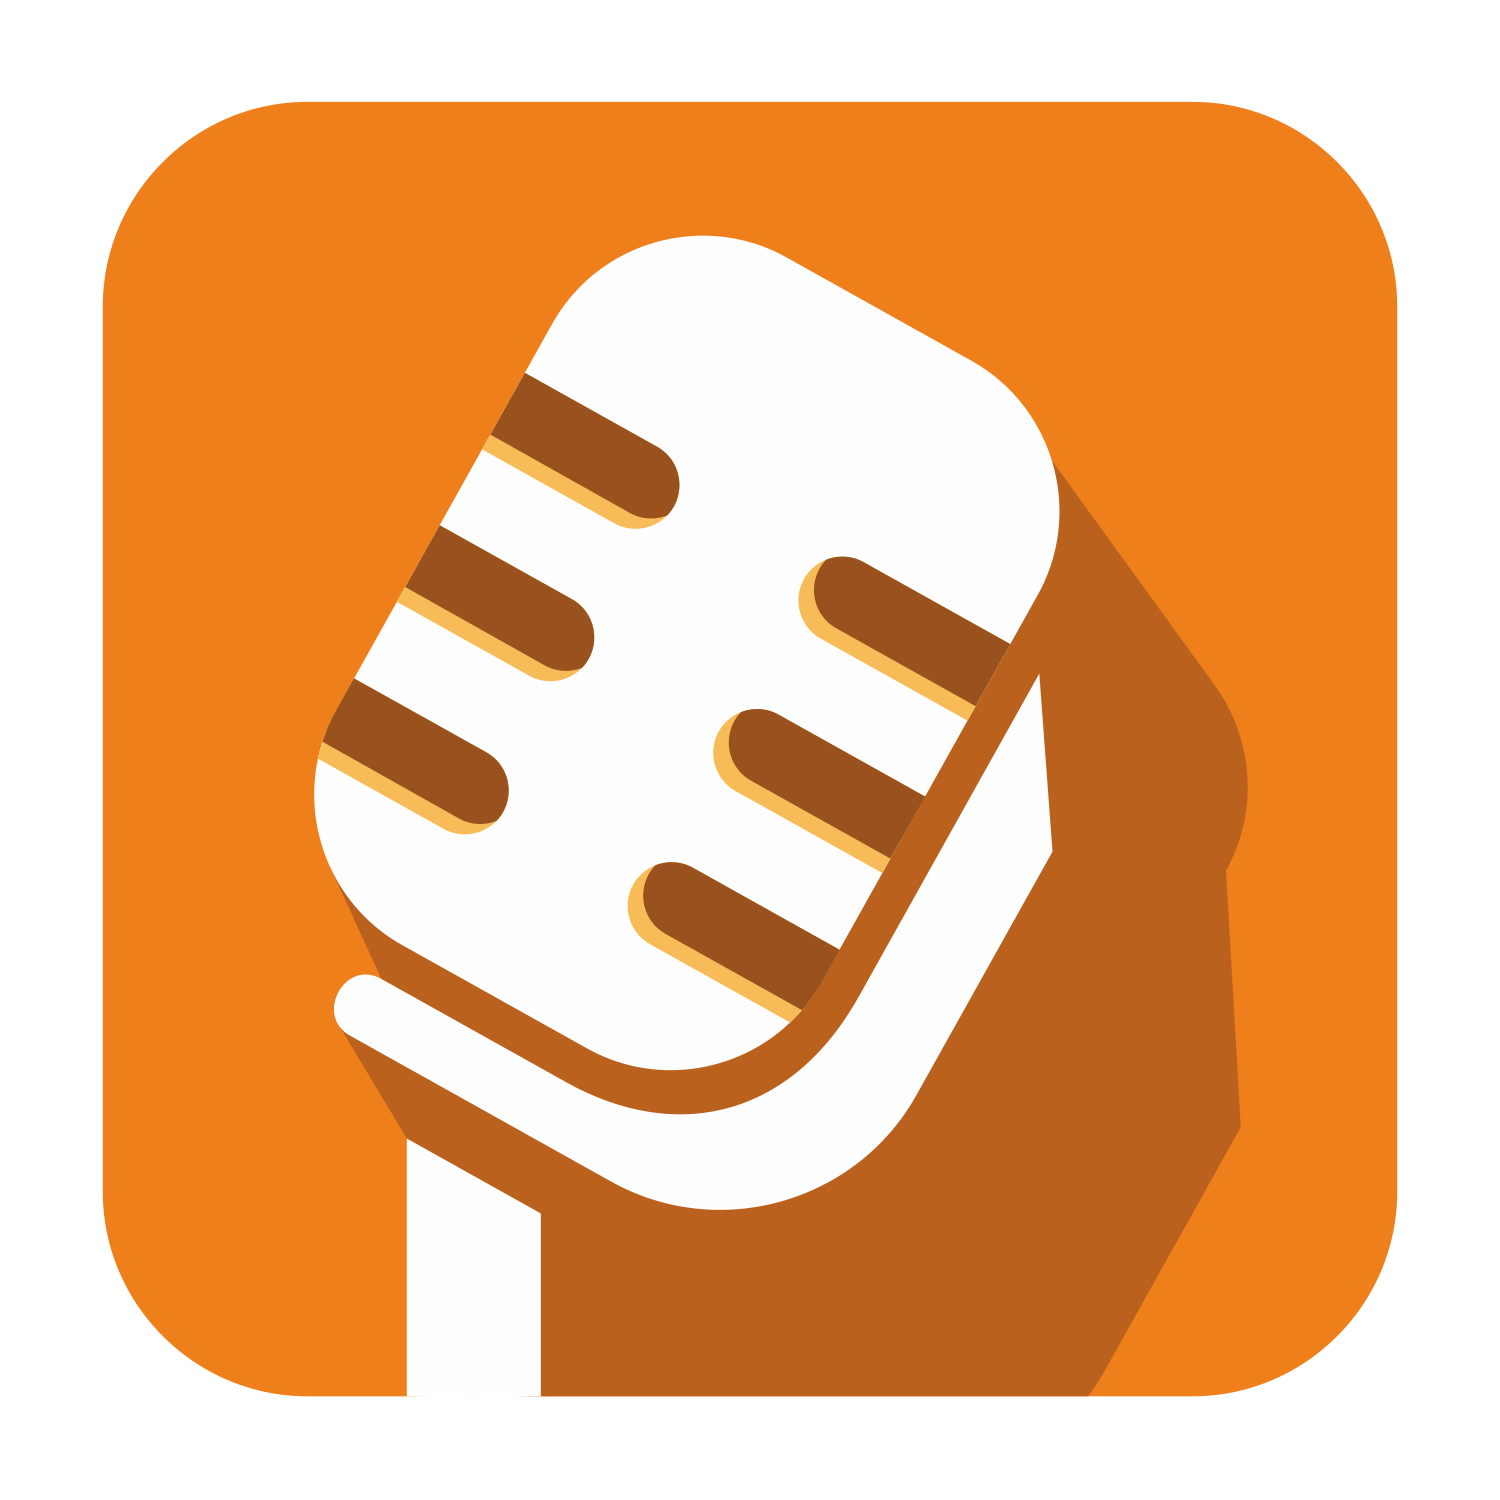 File:Circle-icons-microphone.svg - Wikimedia Commons